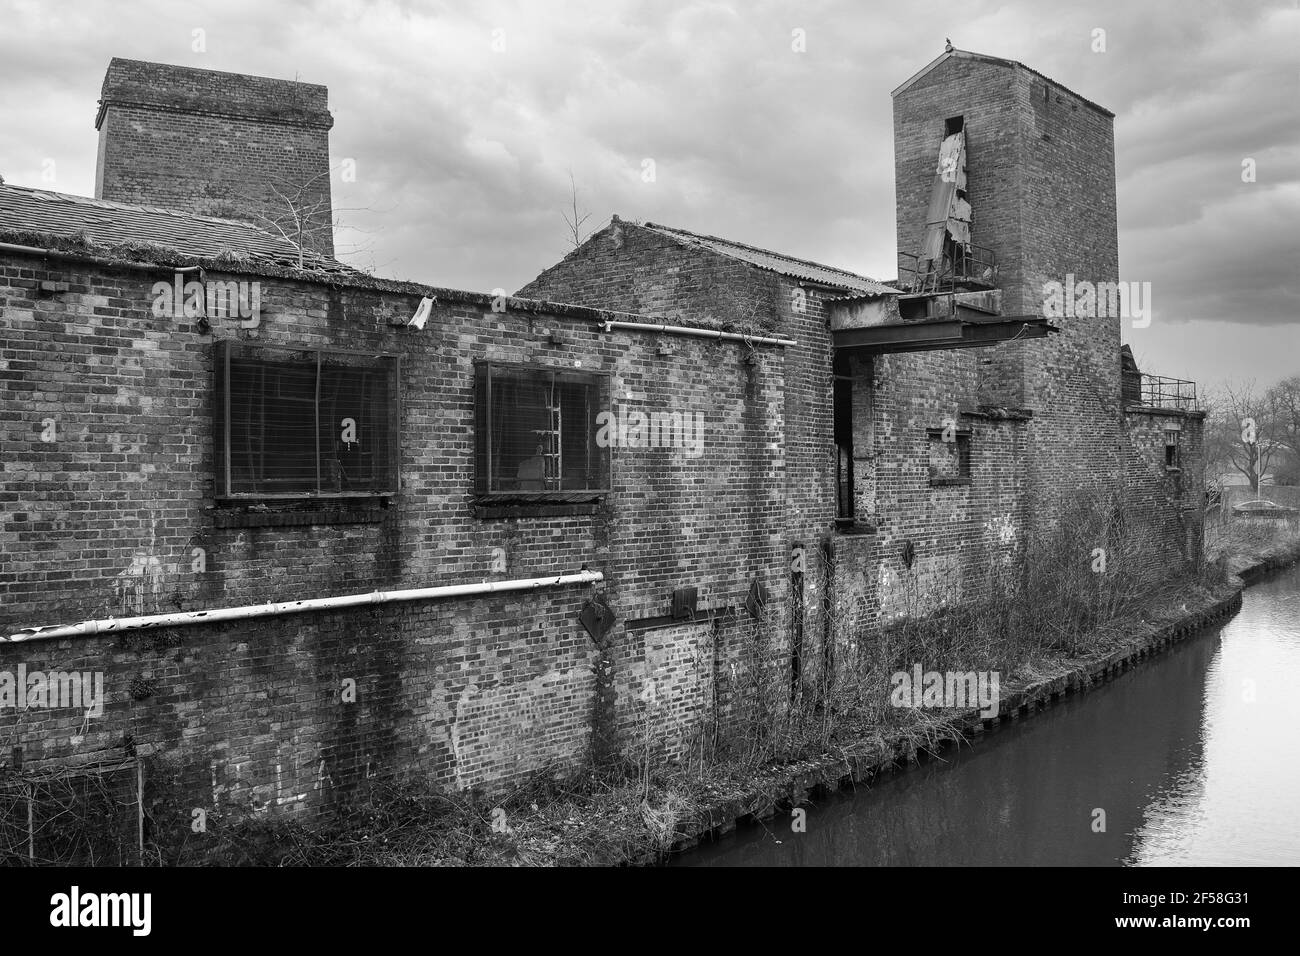 A black and white photograph showing urban decay. An old neglected building abandoned by the side of a canal Stock Photo